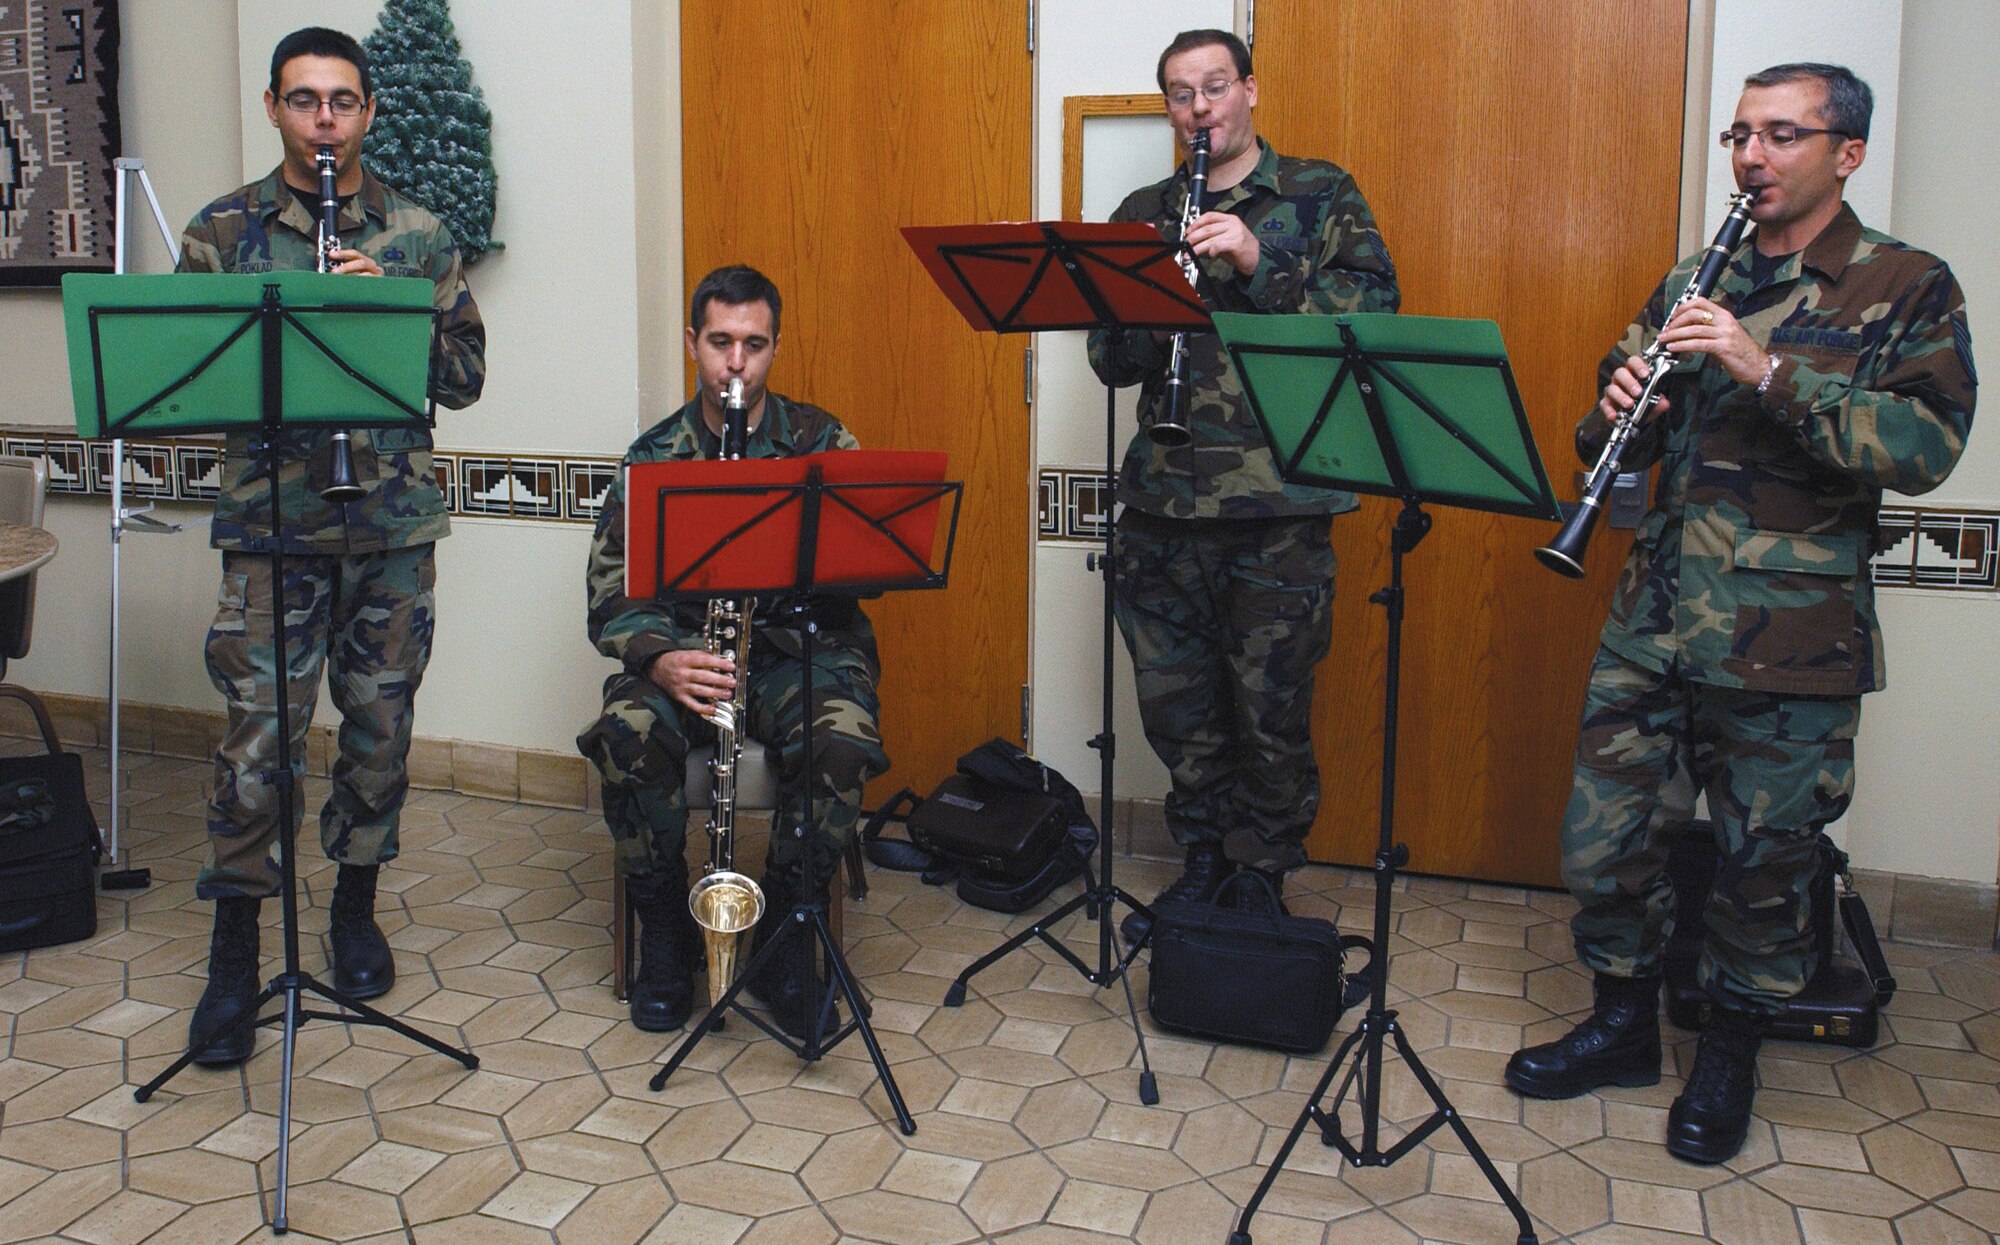 The clarinet quartet of the Air Force Band of the Golden West plays Christmas tunes at Nellis Air  Force Base, Nev., Dec. 12. From left are Staff Sgt. Igor Poklad, Senior Airman Greg Gallant, Technical Sgt. Kevin Conners, and Technical Sgt. Frank Milicia. The four musicians, stationed at Travis Air Force Base, Calif., spent the day spreading holiday cheer at the Mike O’Callaghan Federal Hospital, Base Exchange, Commissary, Lomie Heard Elementary School and several work centers. (U.S. Air Force photo/Staff Sgt. Jeremy Smith)